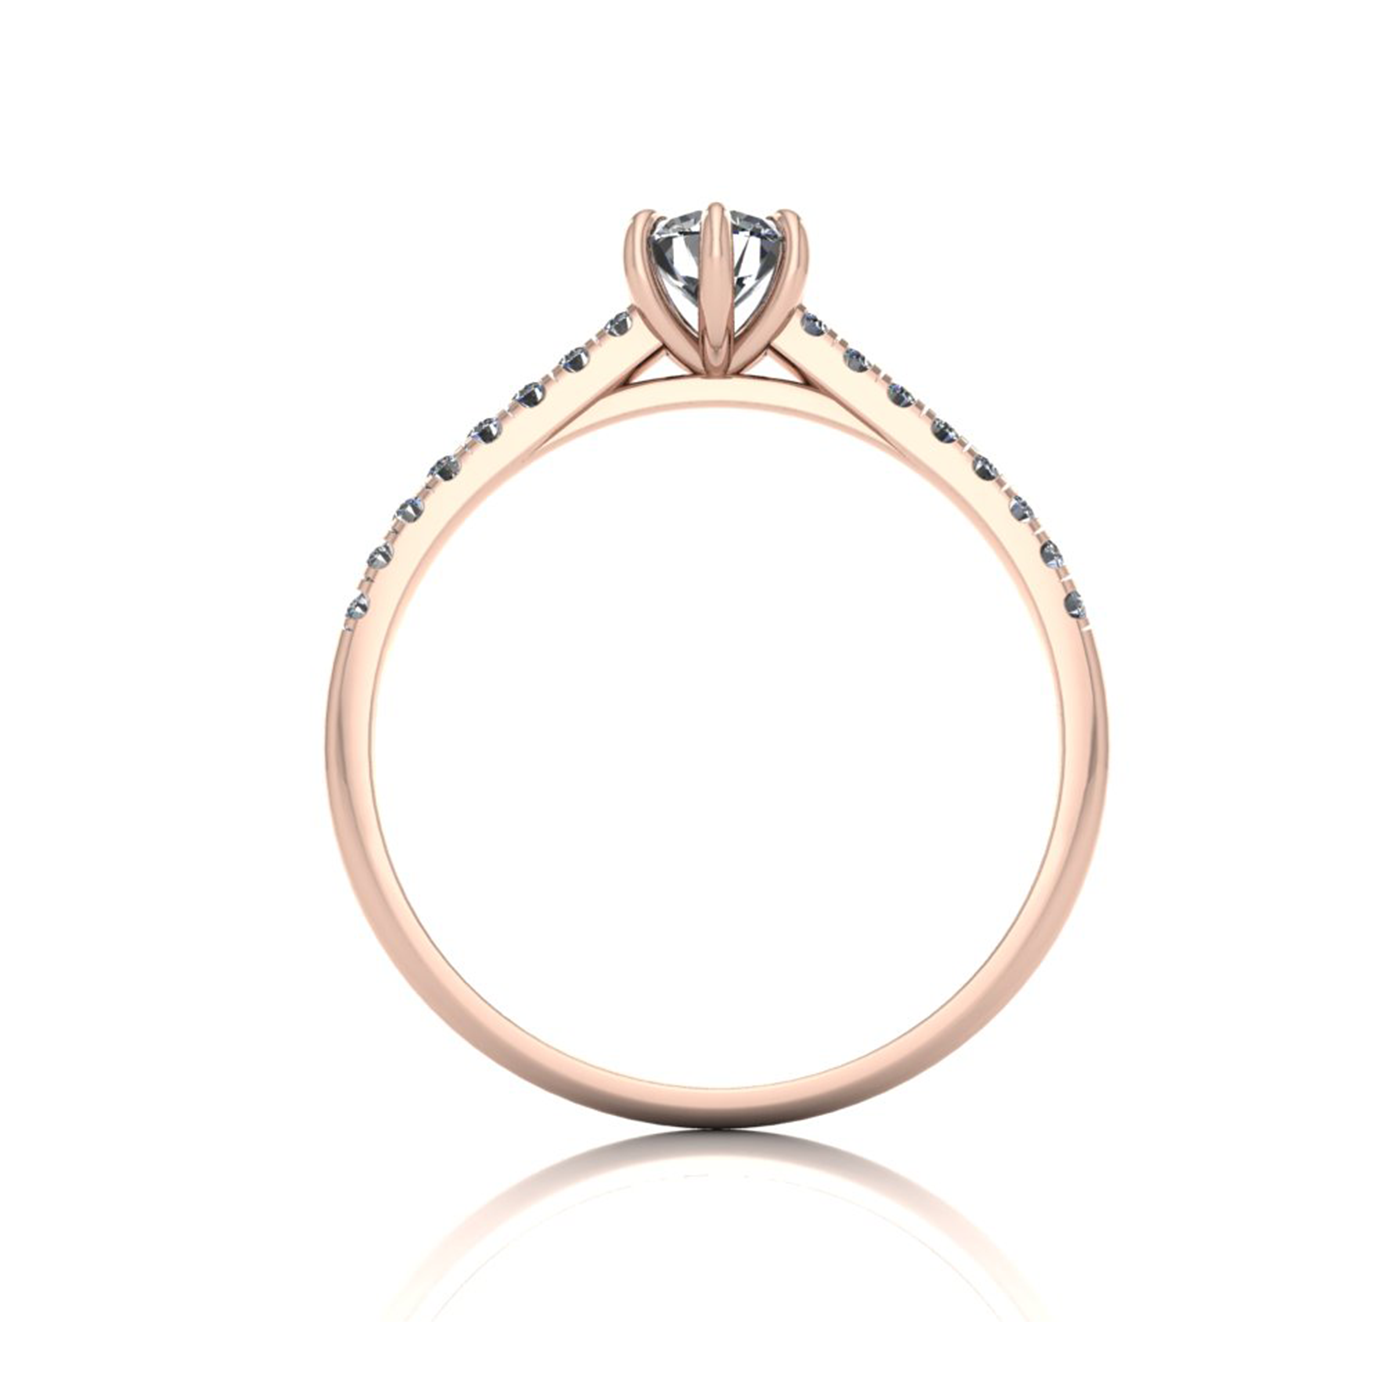 18k rose gold  0,30 ct 6 prongs round cut diamond engagement ring with whisper thin pavÉ set band